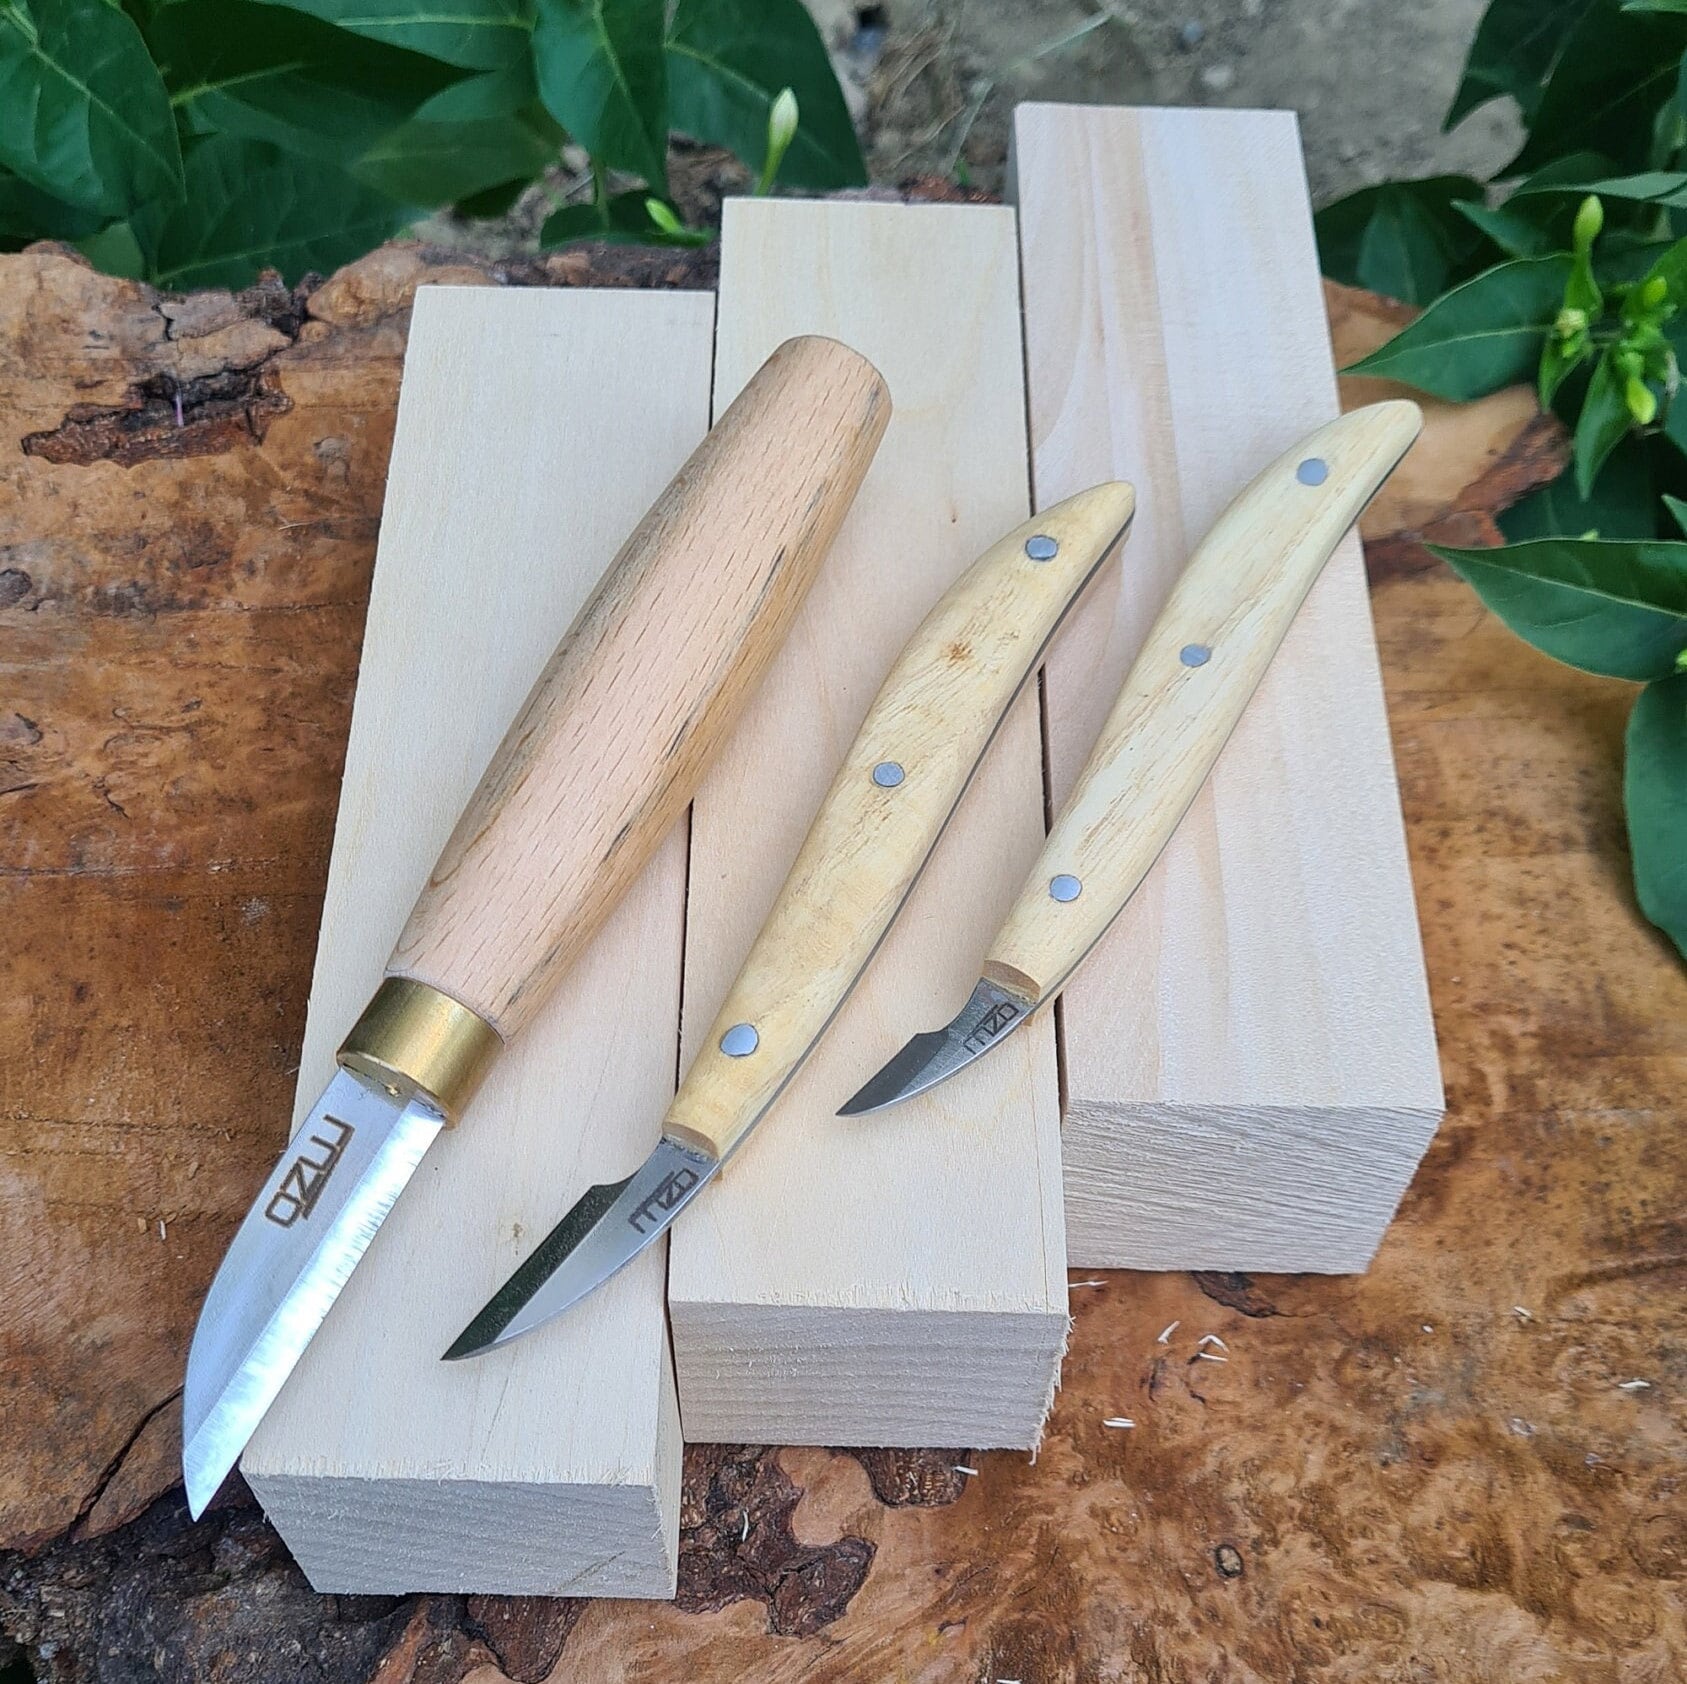 Woodcarving Set With Palm Chisels Beavercraft SC05 